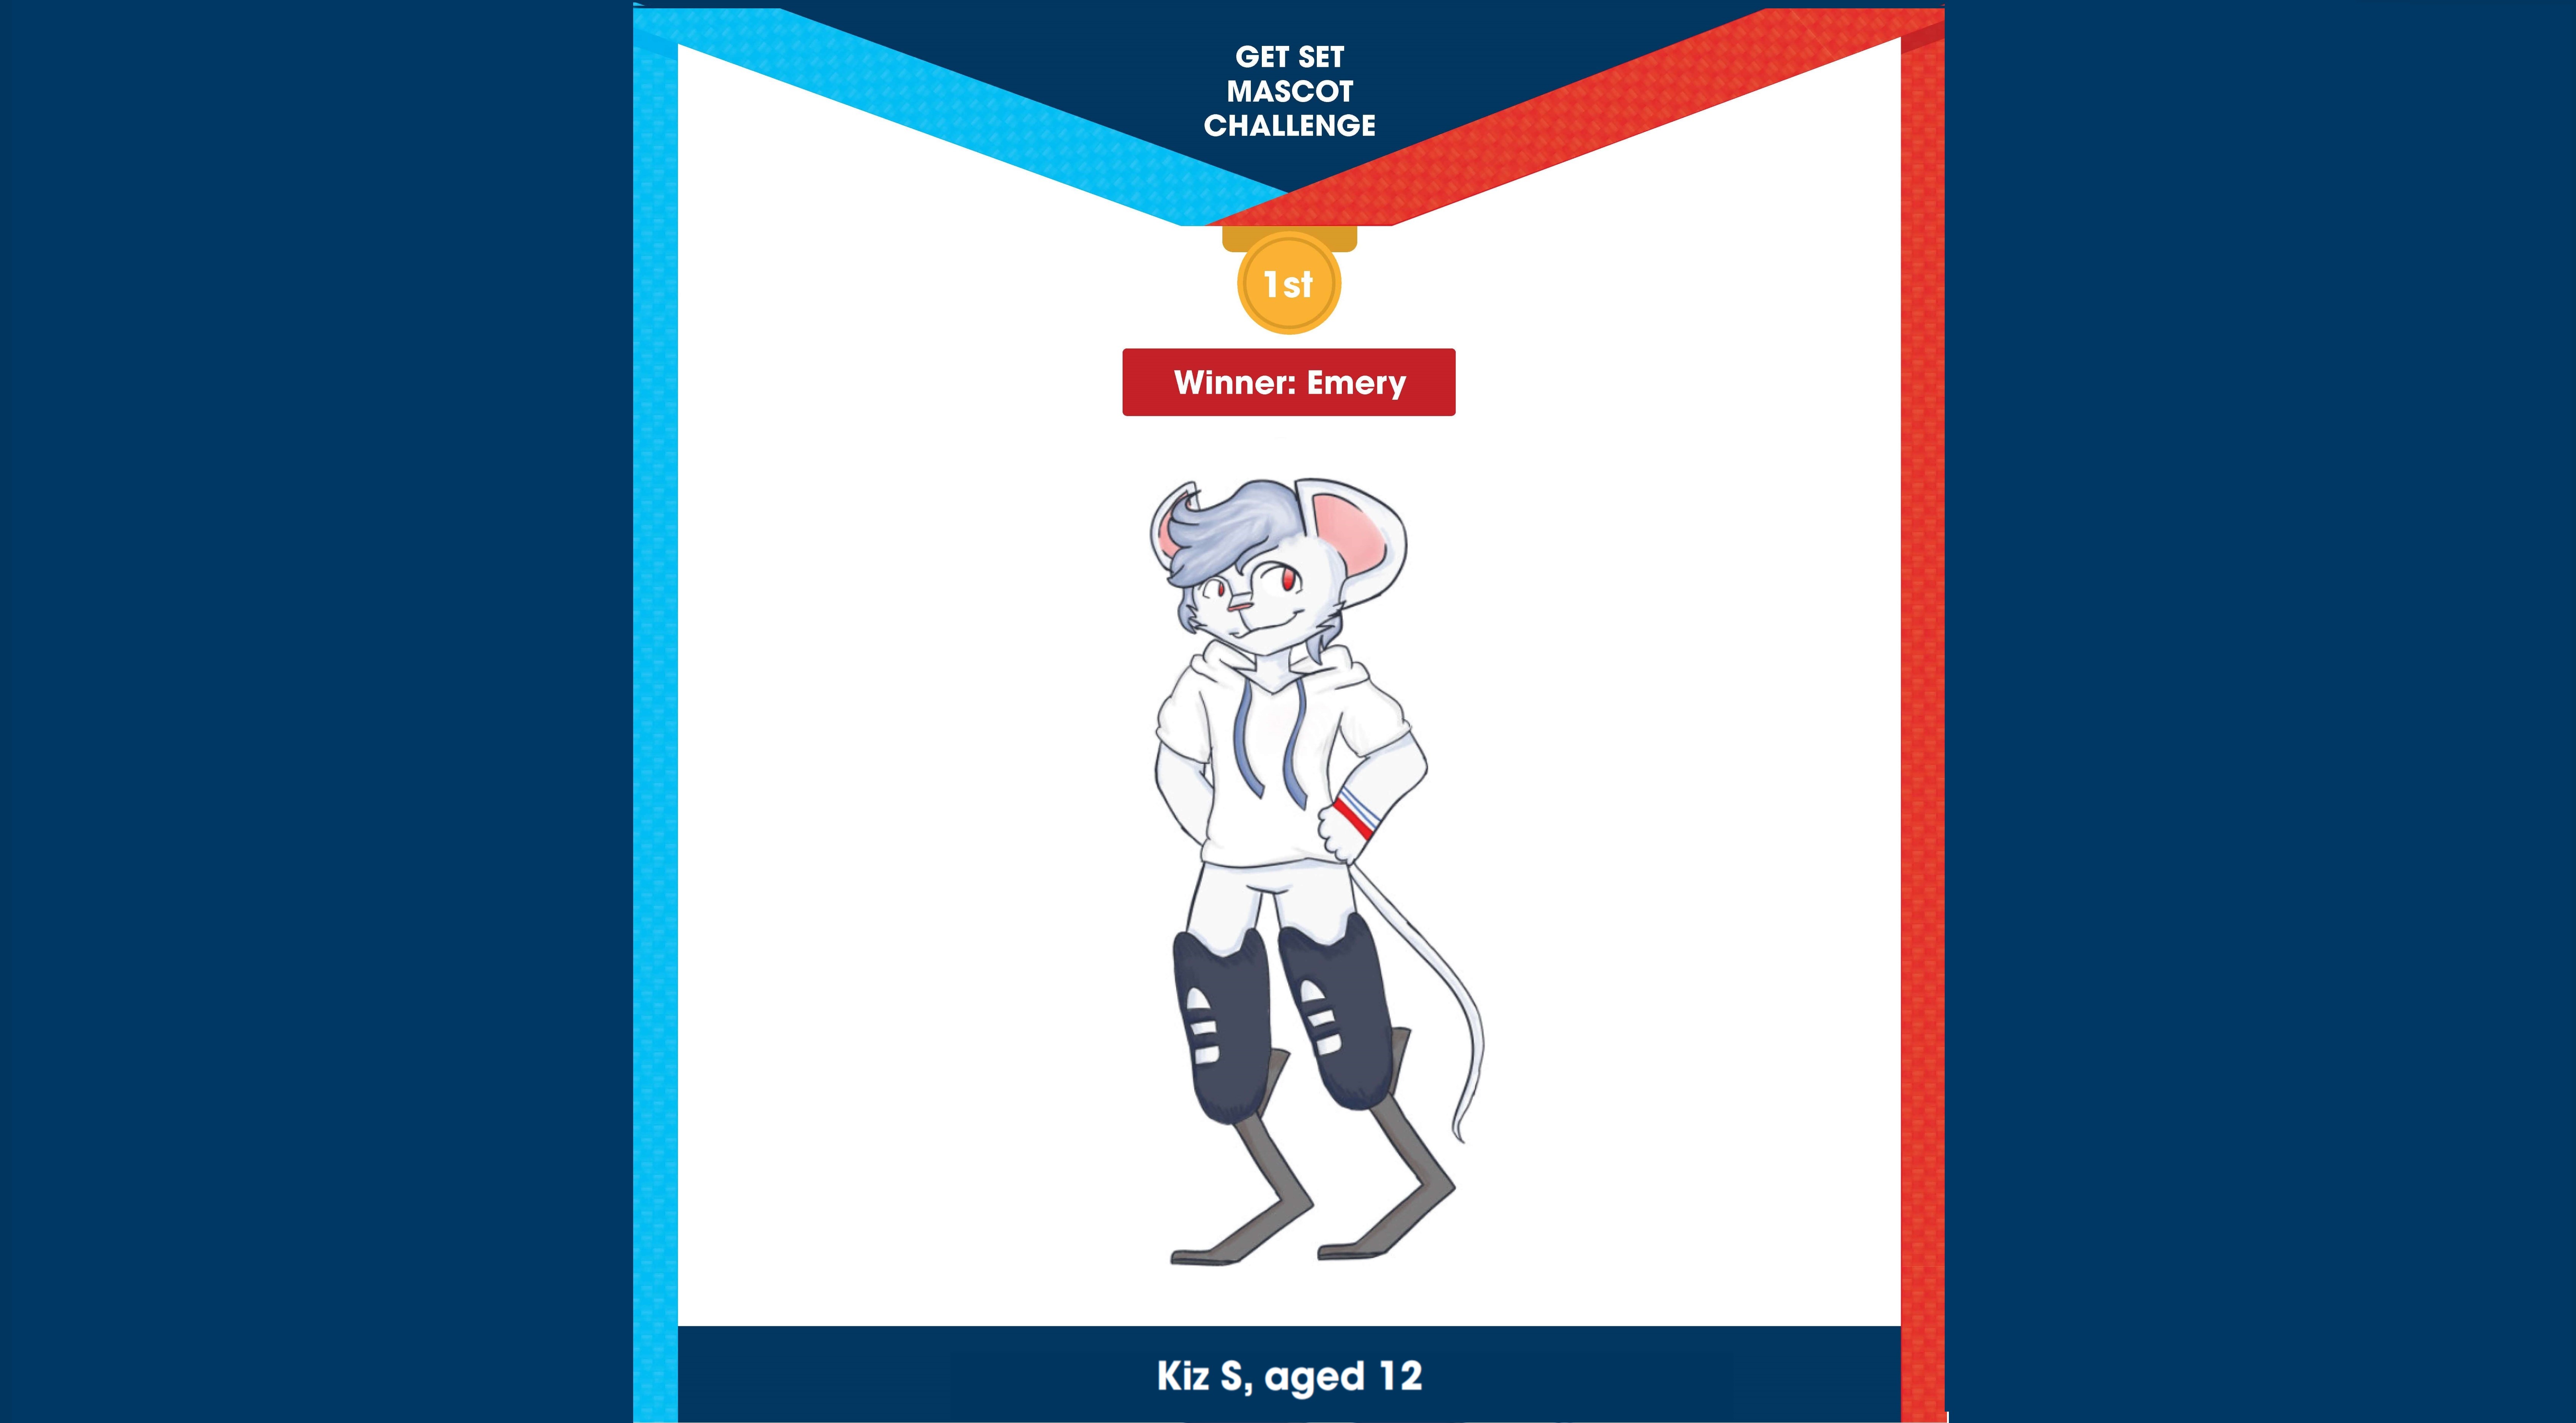 Image of the overall winning design in Get Set's Mascot Challenge. It shows a white mouse with running blades called Emery, designed by Kiz S, aged 12.